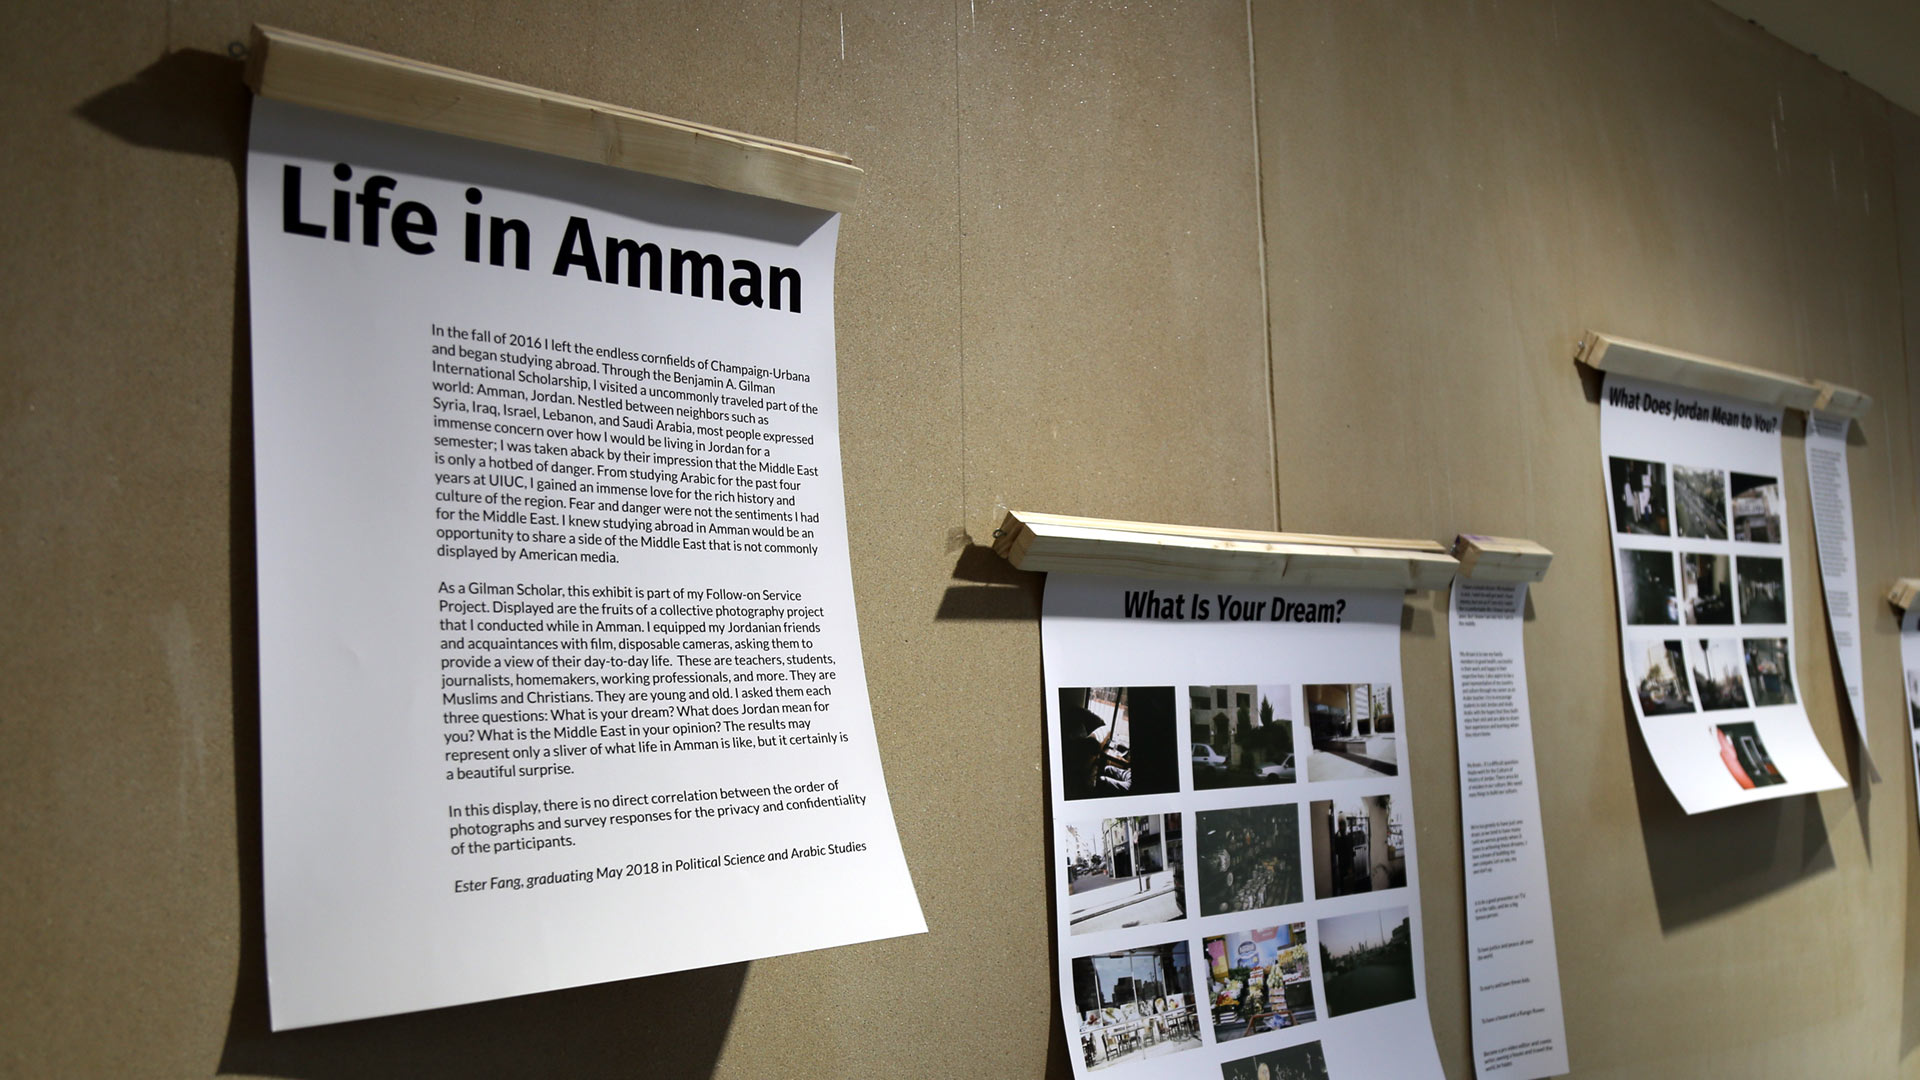 a sequence of captions and images about life in Amman